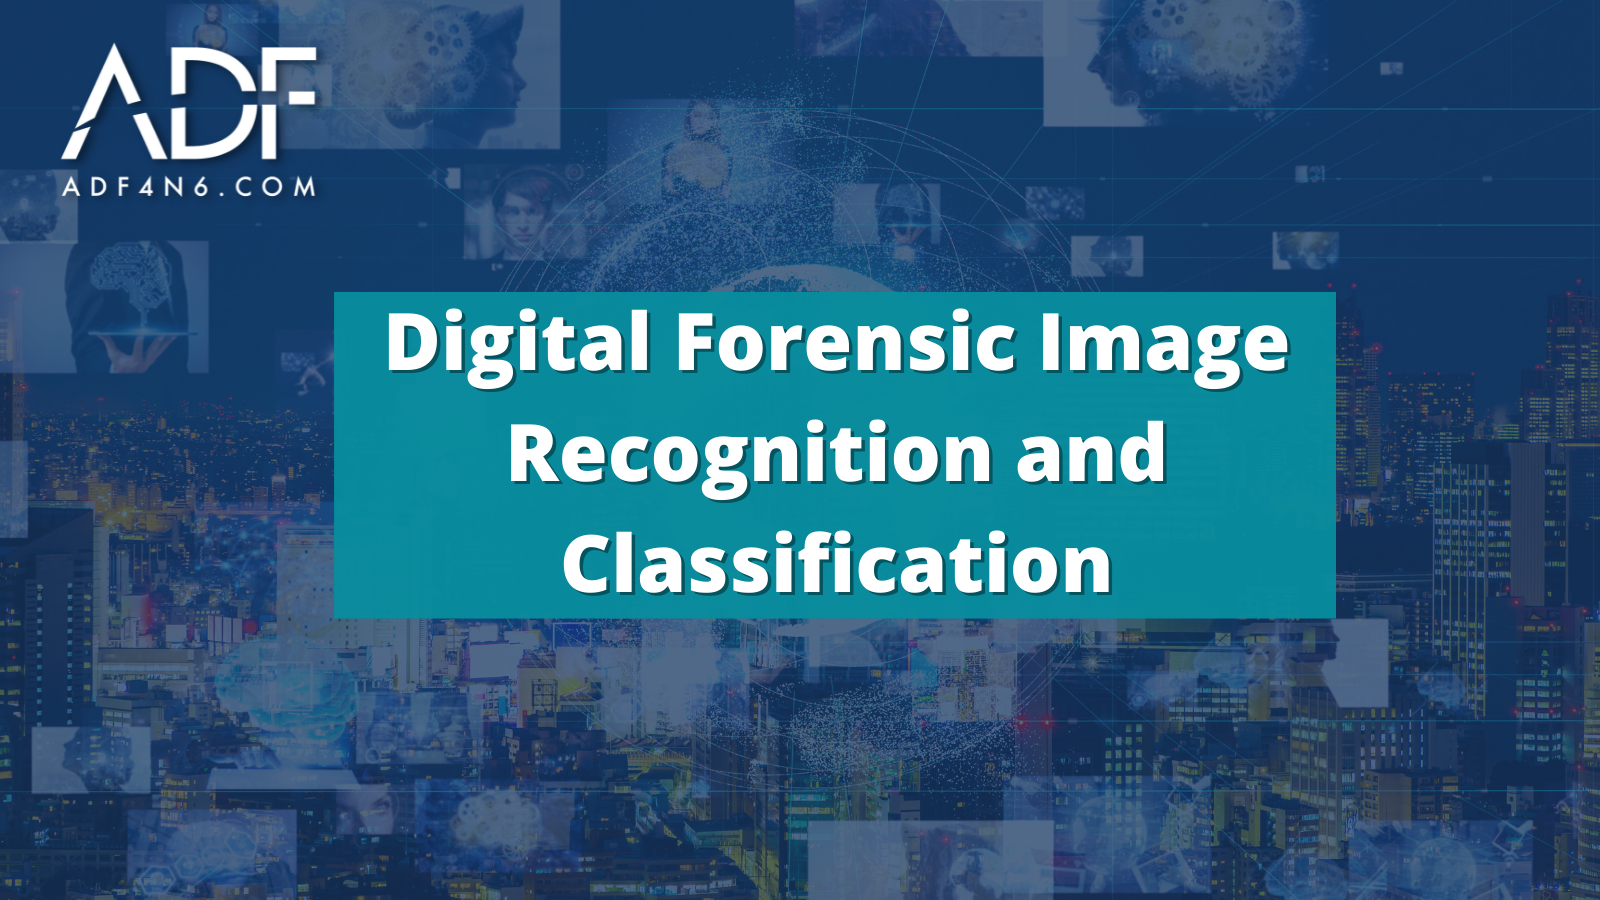 Digital Forensic Image Recognition and Classification